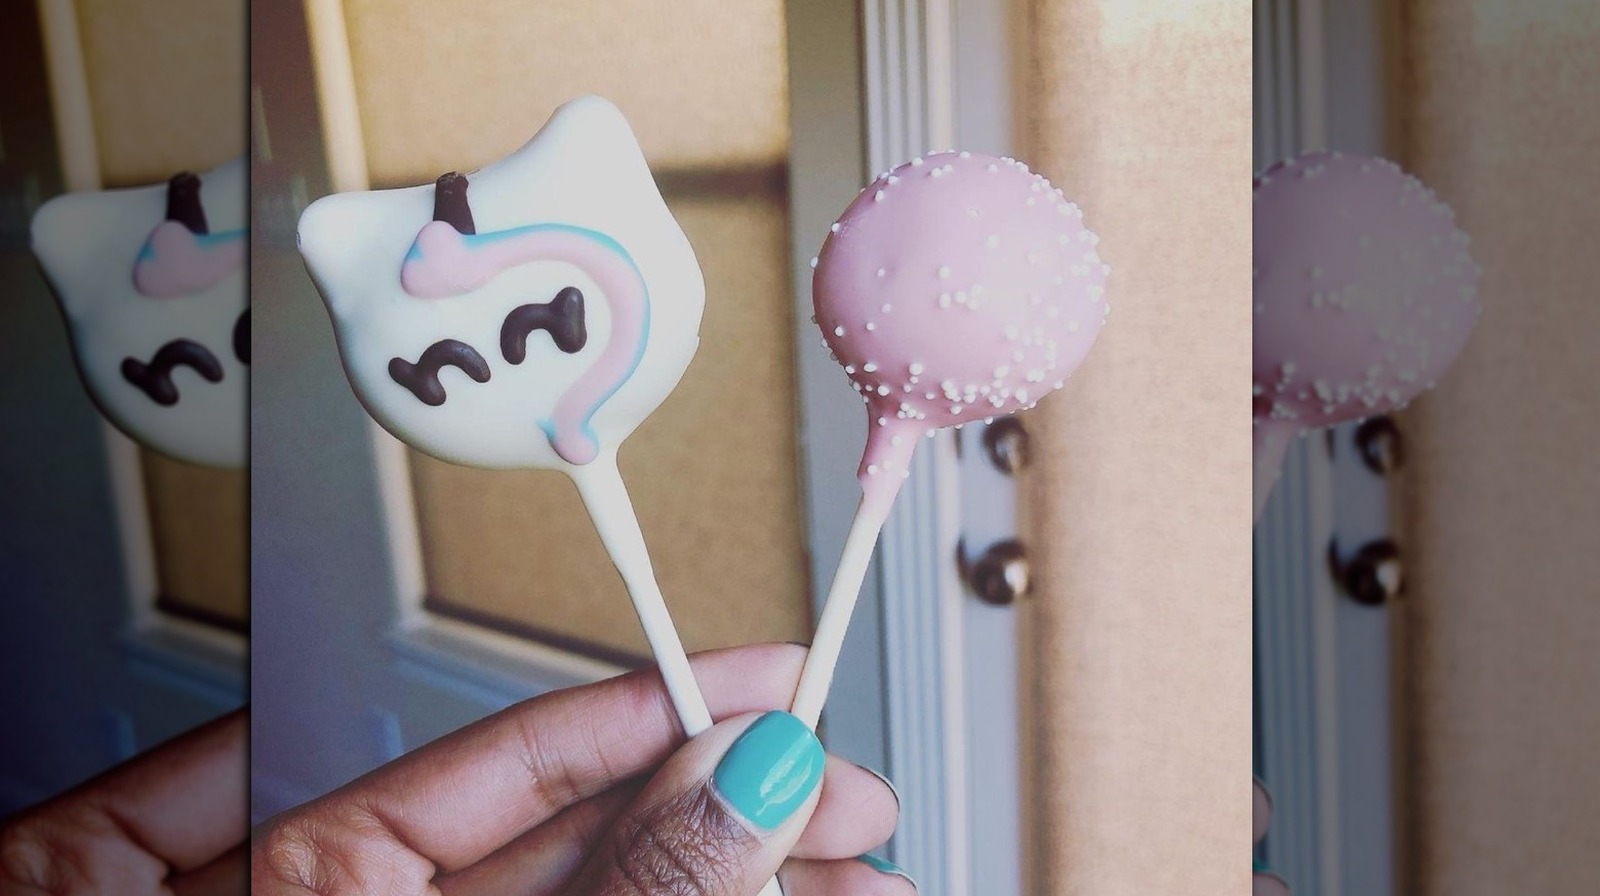 Starbucks Cake Pops: What To Know Before Ordering - Mashed